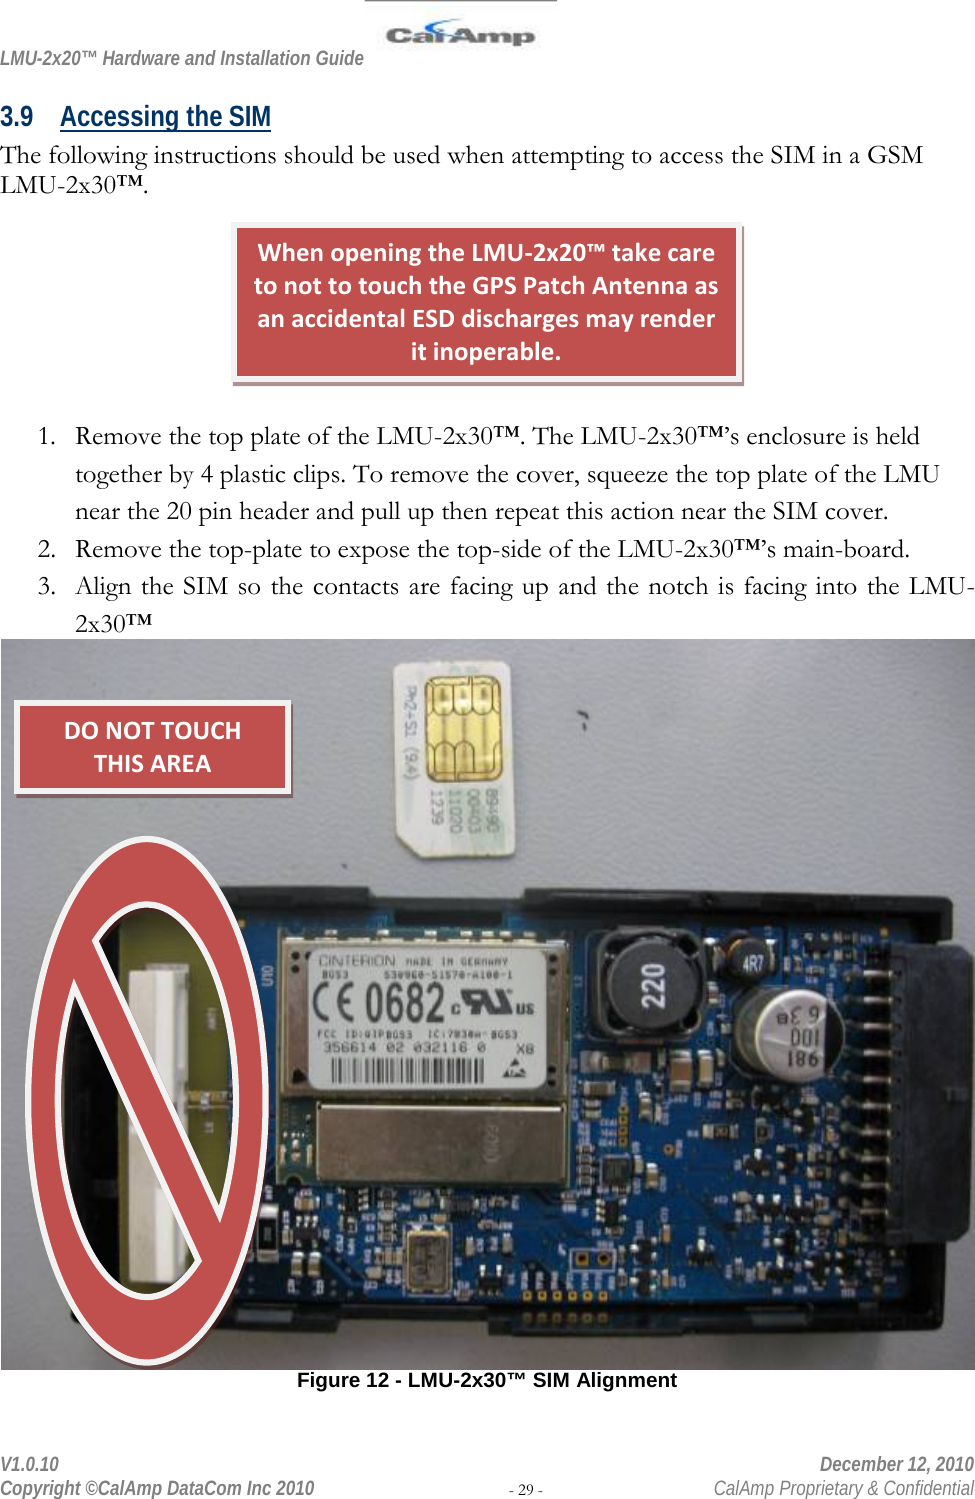 LMU-2x20™ Hardware and Installation Guide  V1.0.10    December 12, 2010 Copyright ©CalAmp DataCom Inc 2010 - 29 -  CalAmp Proprietary &amp; Confidential 3.9 Accessing the SIM The following instructions should be used when attempting to access the SIM in a GSM LMU-2x30™.        1. Remove the top plate of the LMU-2x30™. The LMU-2x30™’s enclosure is held together by 4 plastic clips. To remove the cover, squeeze the top plate of the LMU near the 20 pin header and pull up then repeat this action near the SIM cover.  2. Remove the top-plate to expose the top-side of the LMU-2x30™’s main-board. 3. Align the SIM so the contacts are facing up and the notch is facing into the LMU-2x30™  Figure 12 - LMU-2x30™ SIM Alignment When opening the LMU-2x20™ take care to not to touch the GPS Patch Antenna as an accidental ESD discharges may render it inoperable. DO NOT TOUCH  THIS AREA 